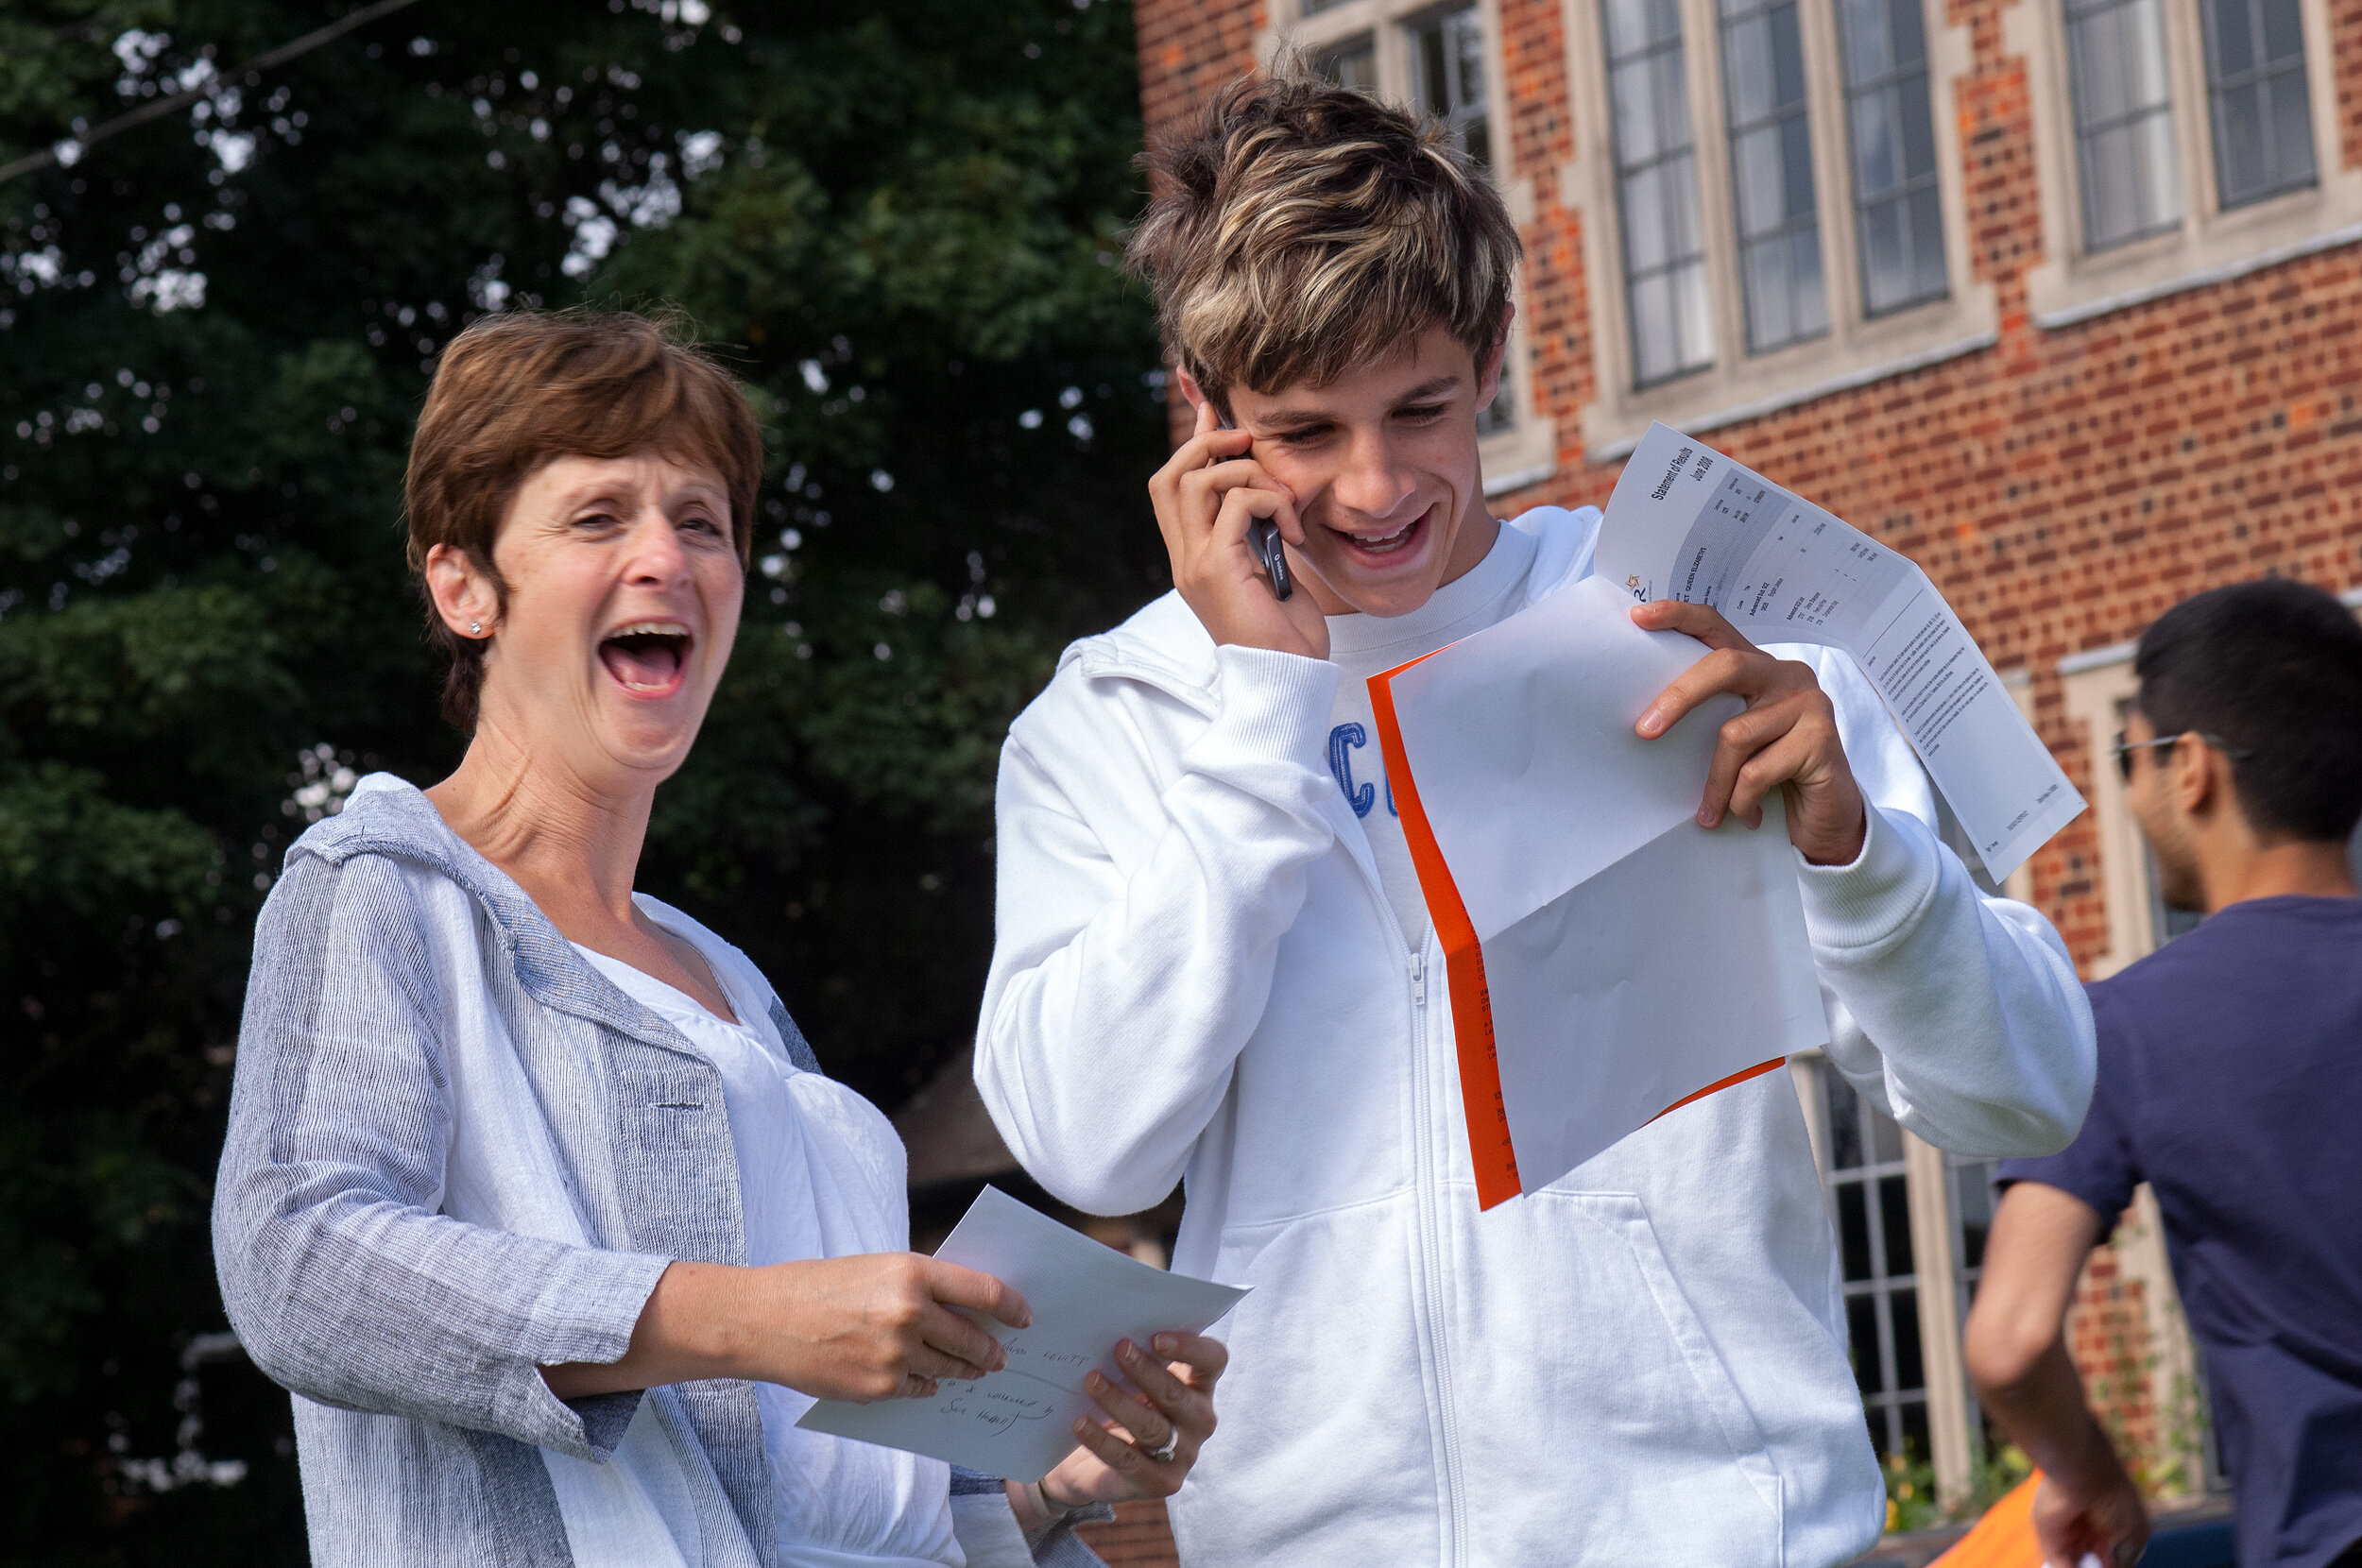  Queen Elizabeth’s School, Barnet, UK. A-level results day.  Mother and son.  Shot by Eleanor Bentall, photographer. 